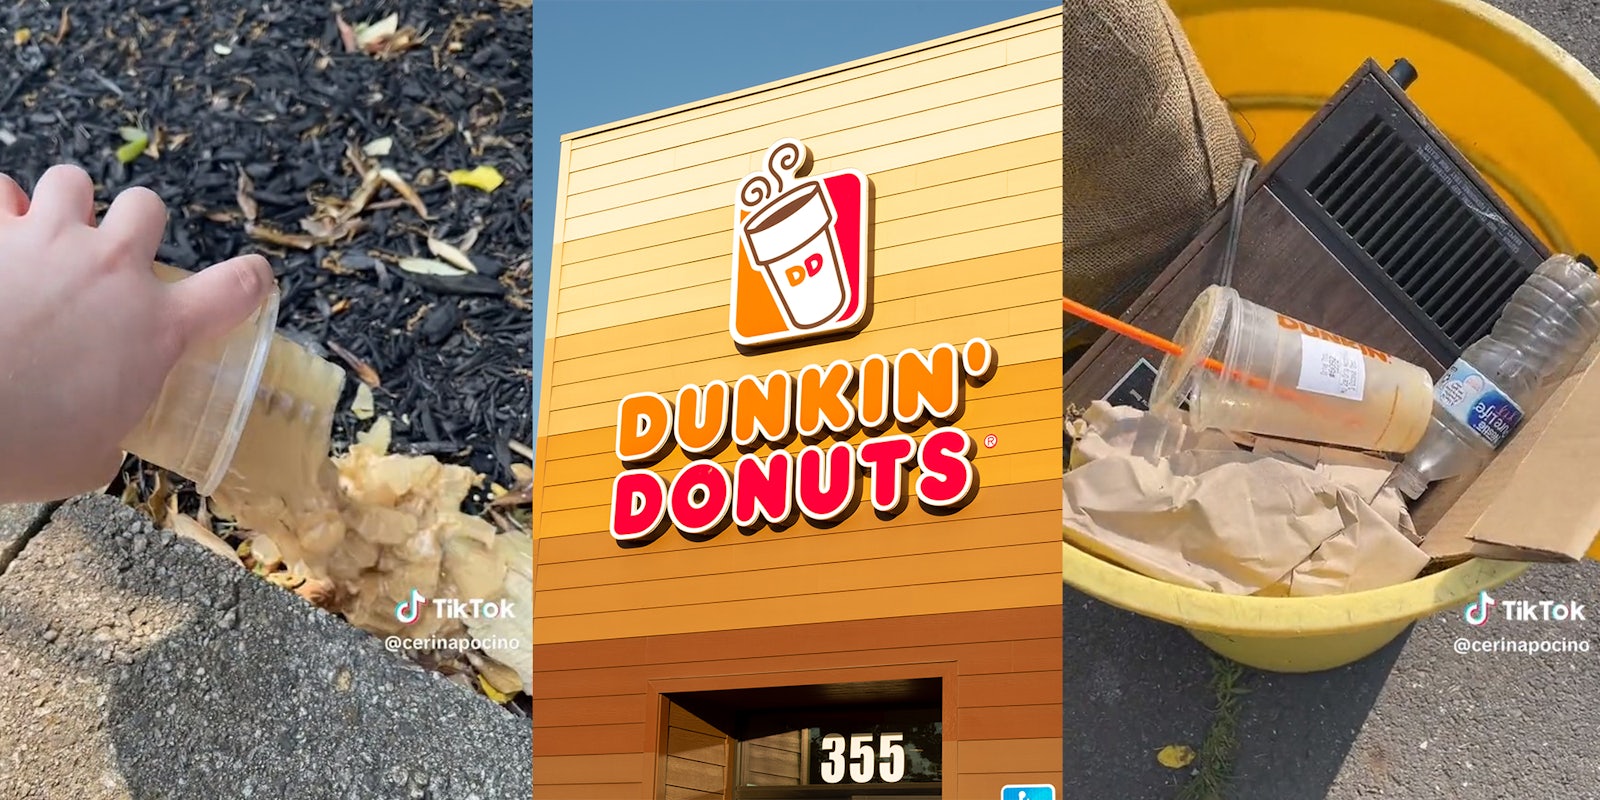 Customer dumps out Dunkin' iced coffee after claiming it was 'burnt'